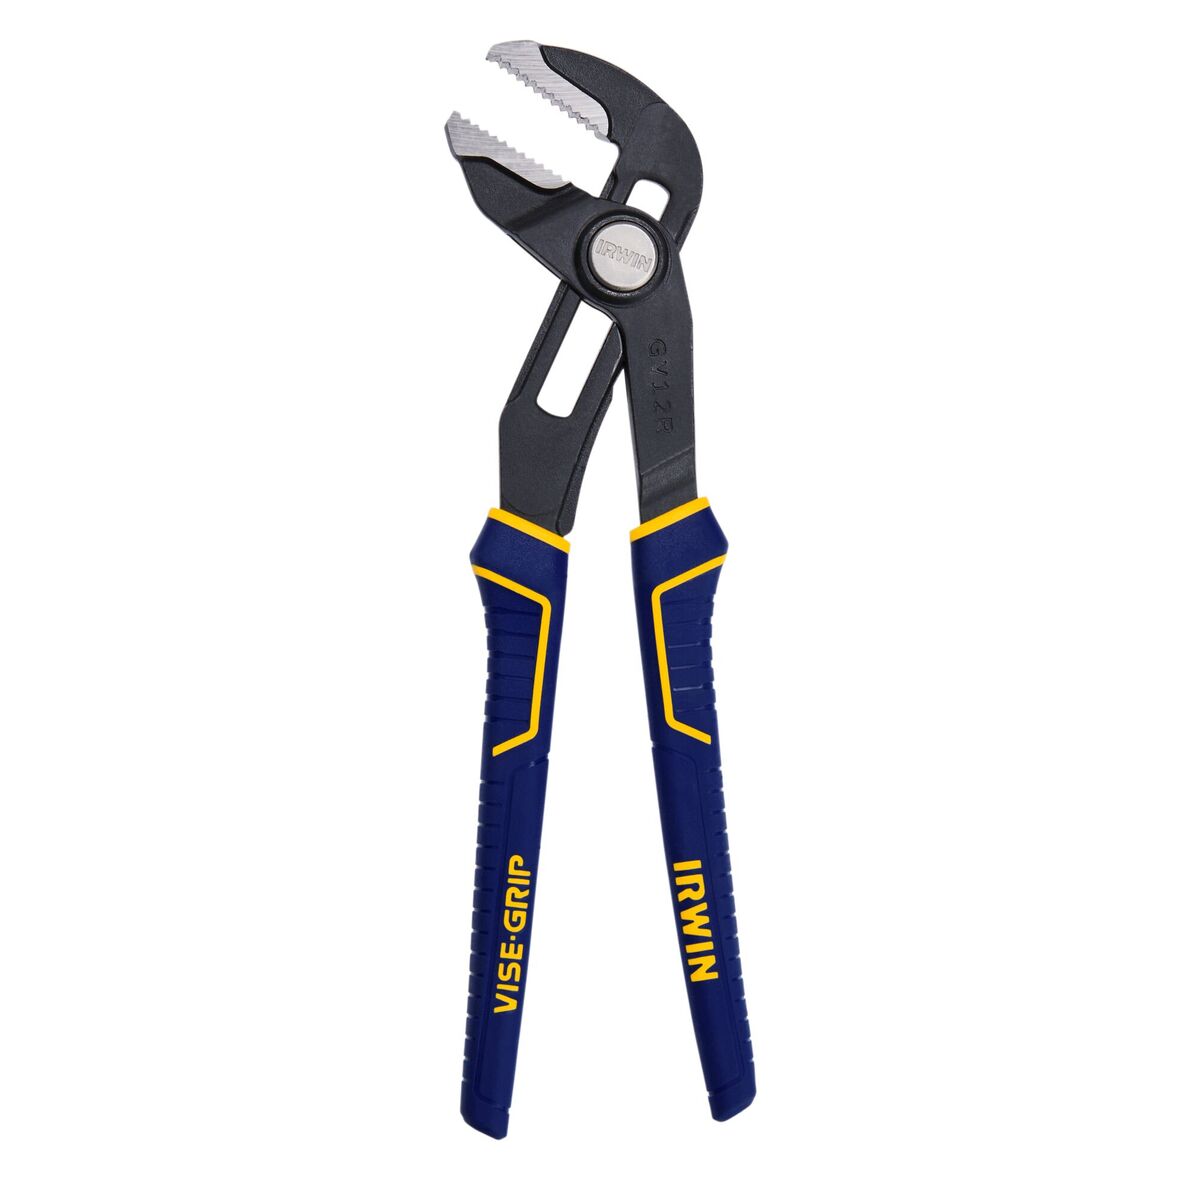 Irwin 12LC 12-Inch Vise-Grip Large Jaw Locking Pliers